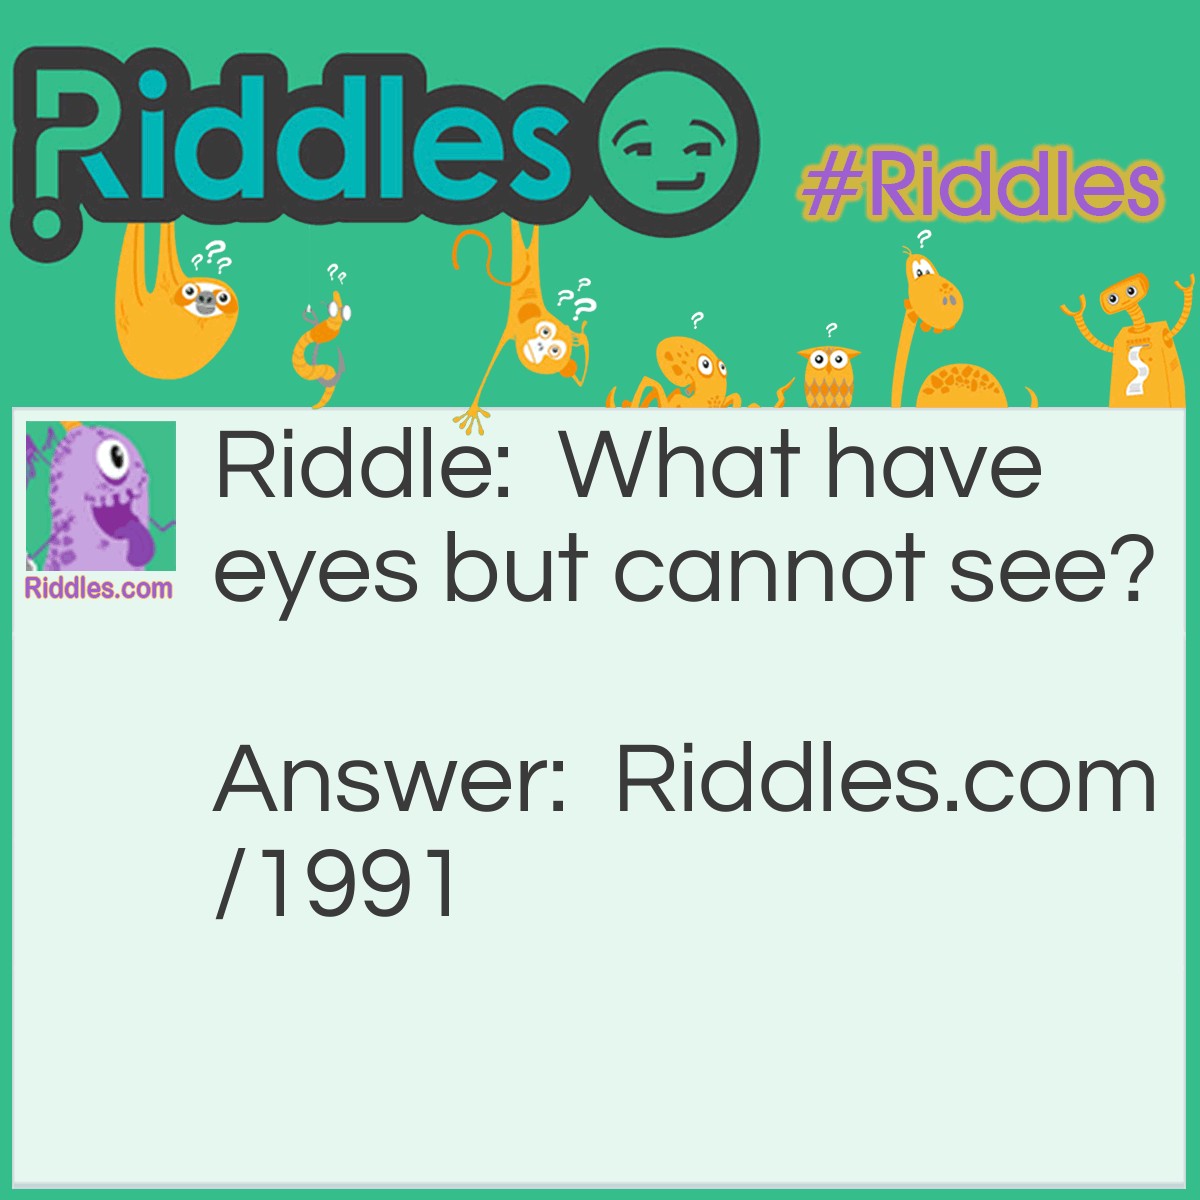 Riddle: What have eyes but cannot see? Answer: Potatoes.